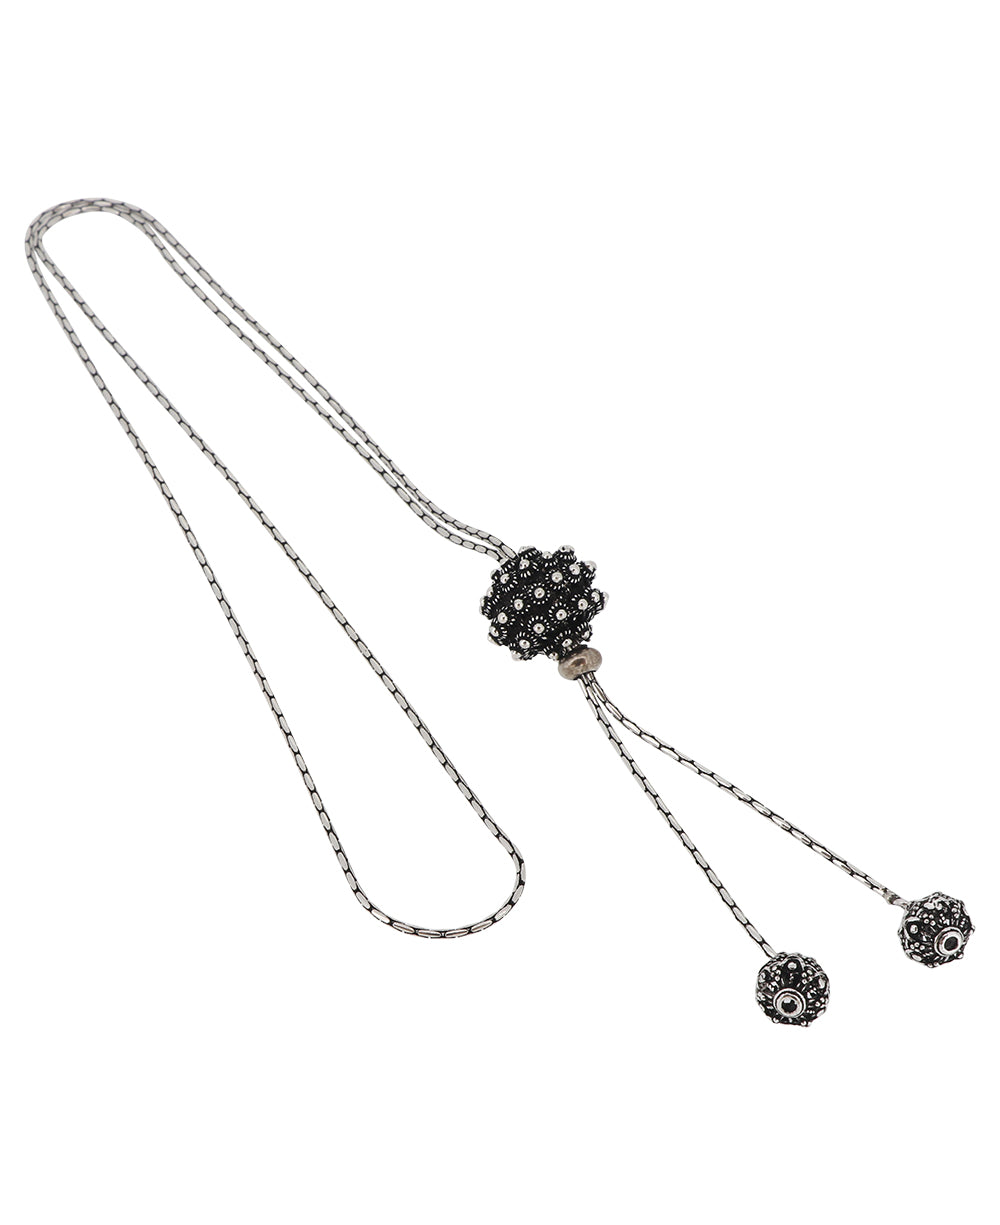 Adjustable length silver lariat necklace featuring intricate floral details, handcrafted in Laos